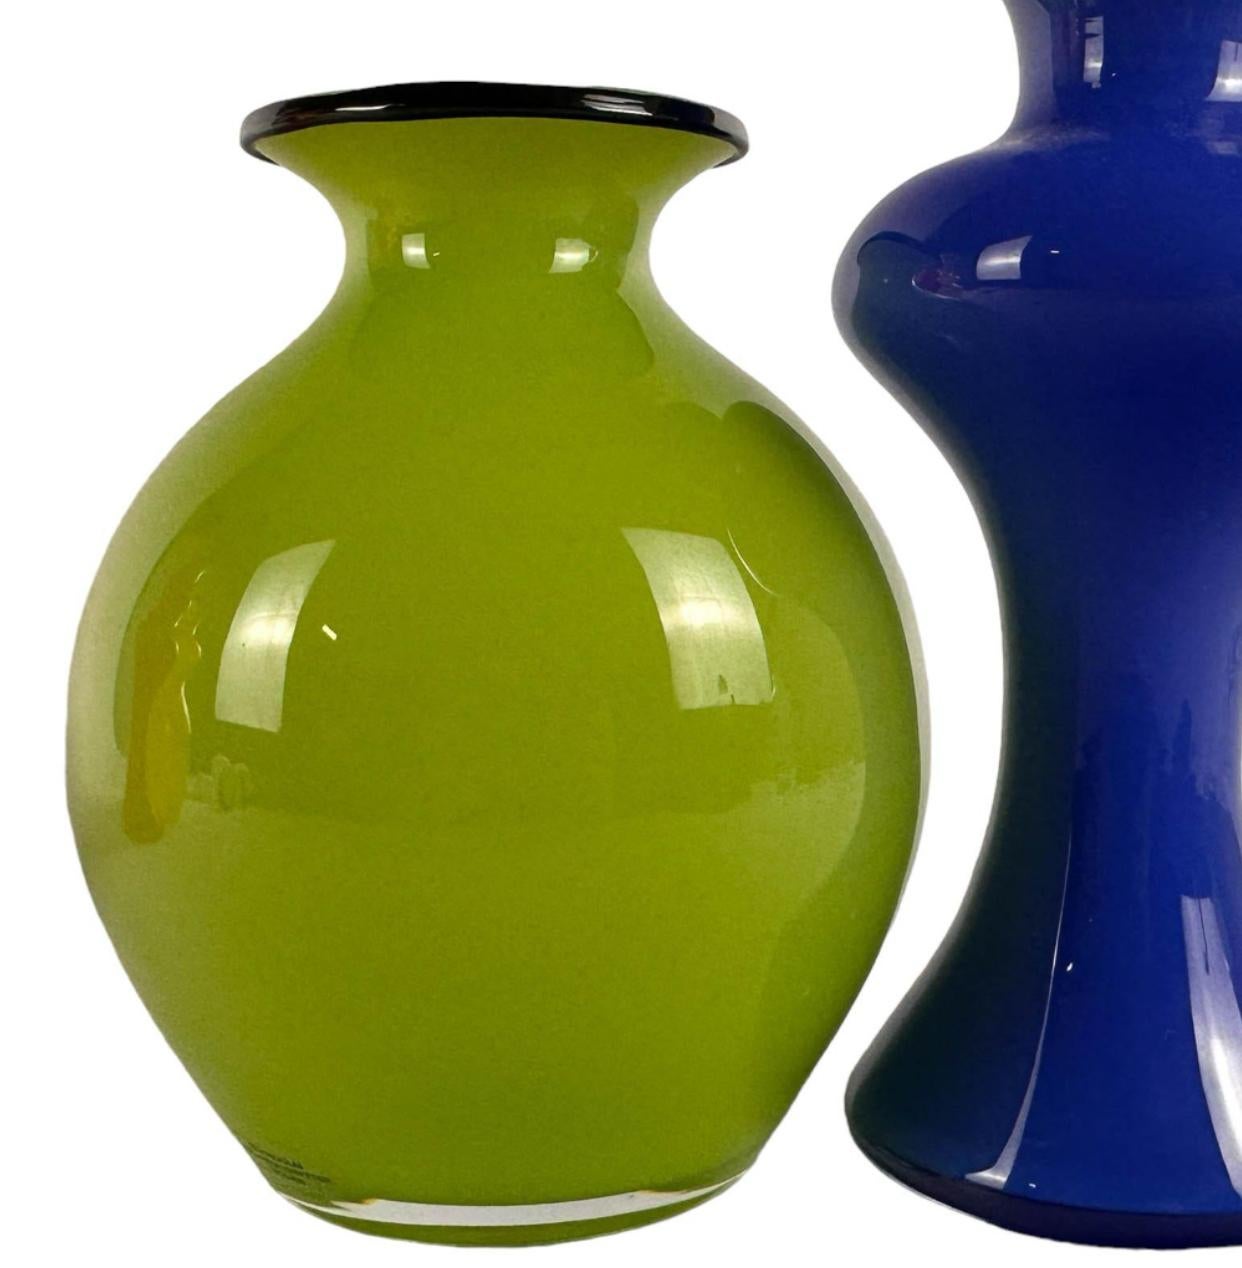 Blown Glass Colorful Four Piece Art Glass Decanter Collection by Strombergshyttan Studio For Sale